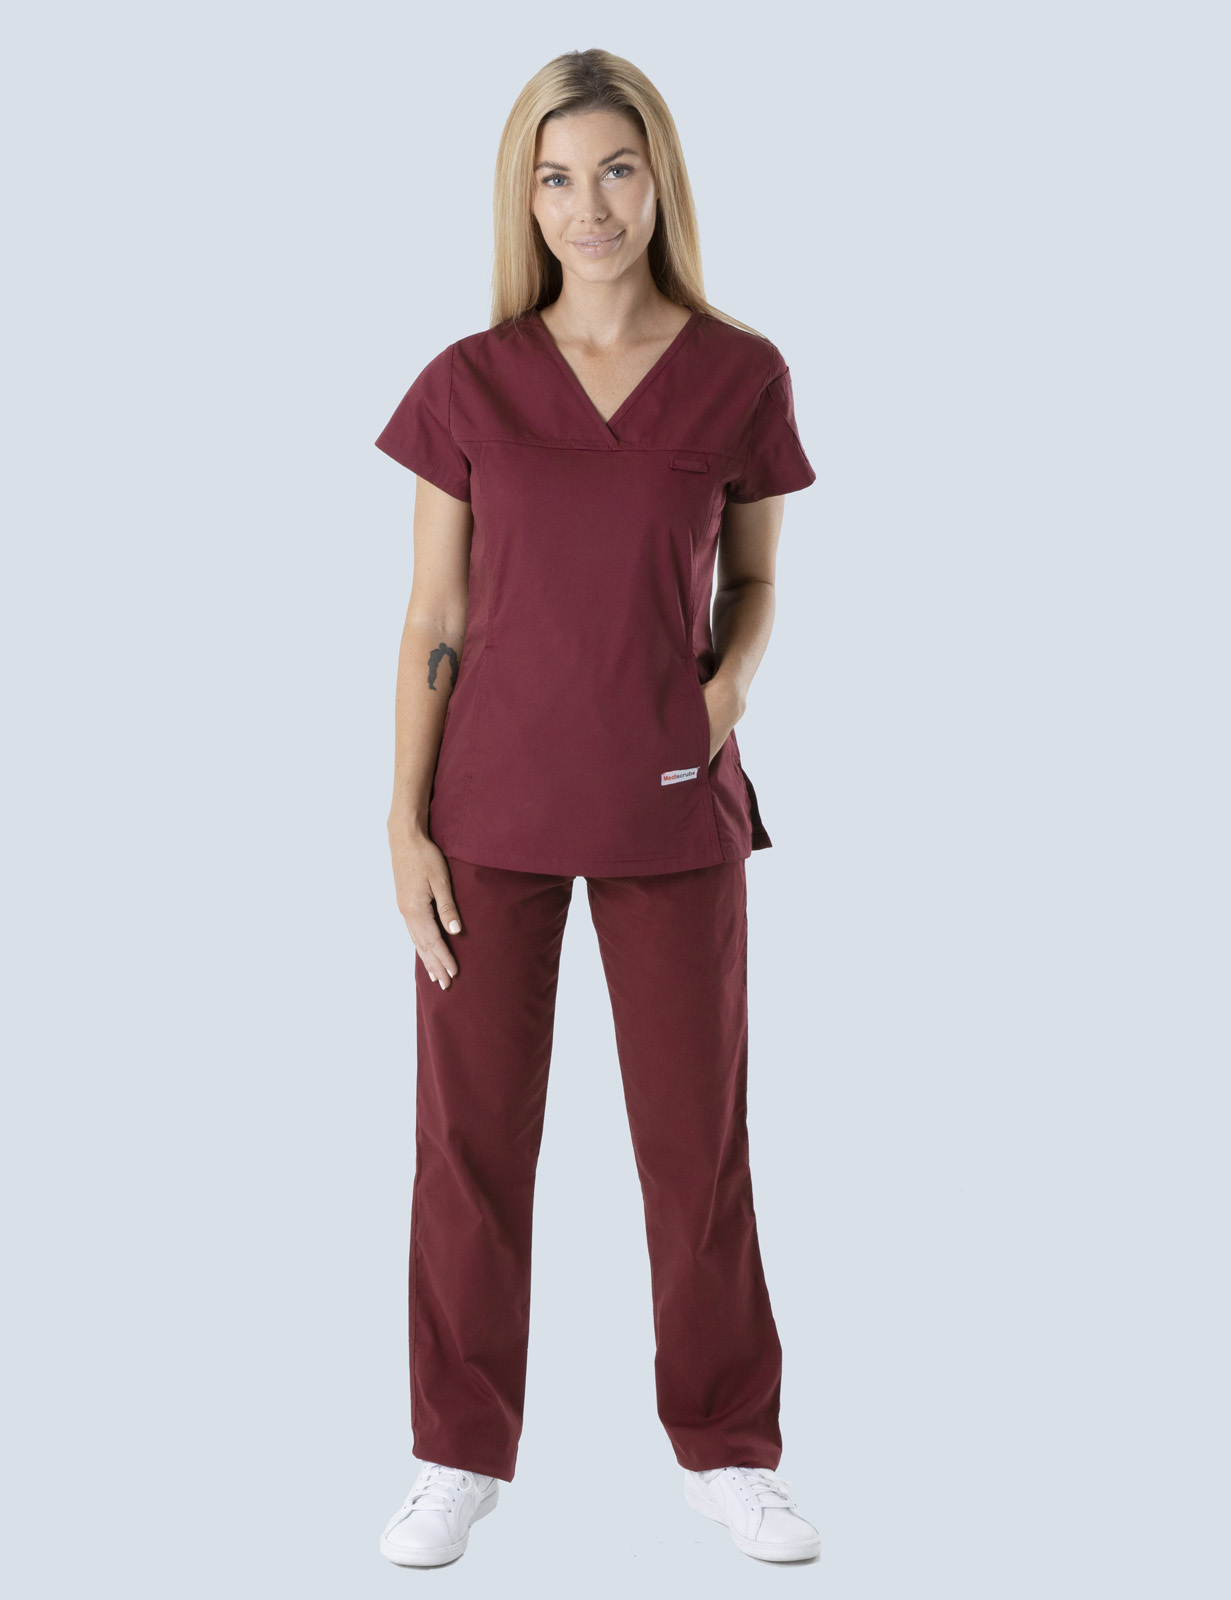 Women's Fit Solid Scrub Top - Burgundy - Small - 2